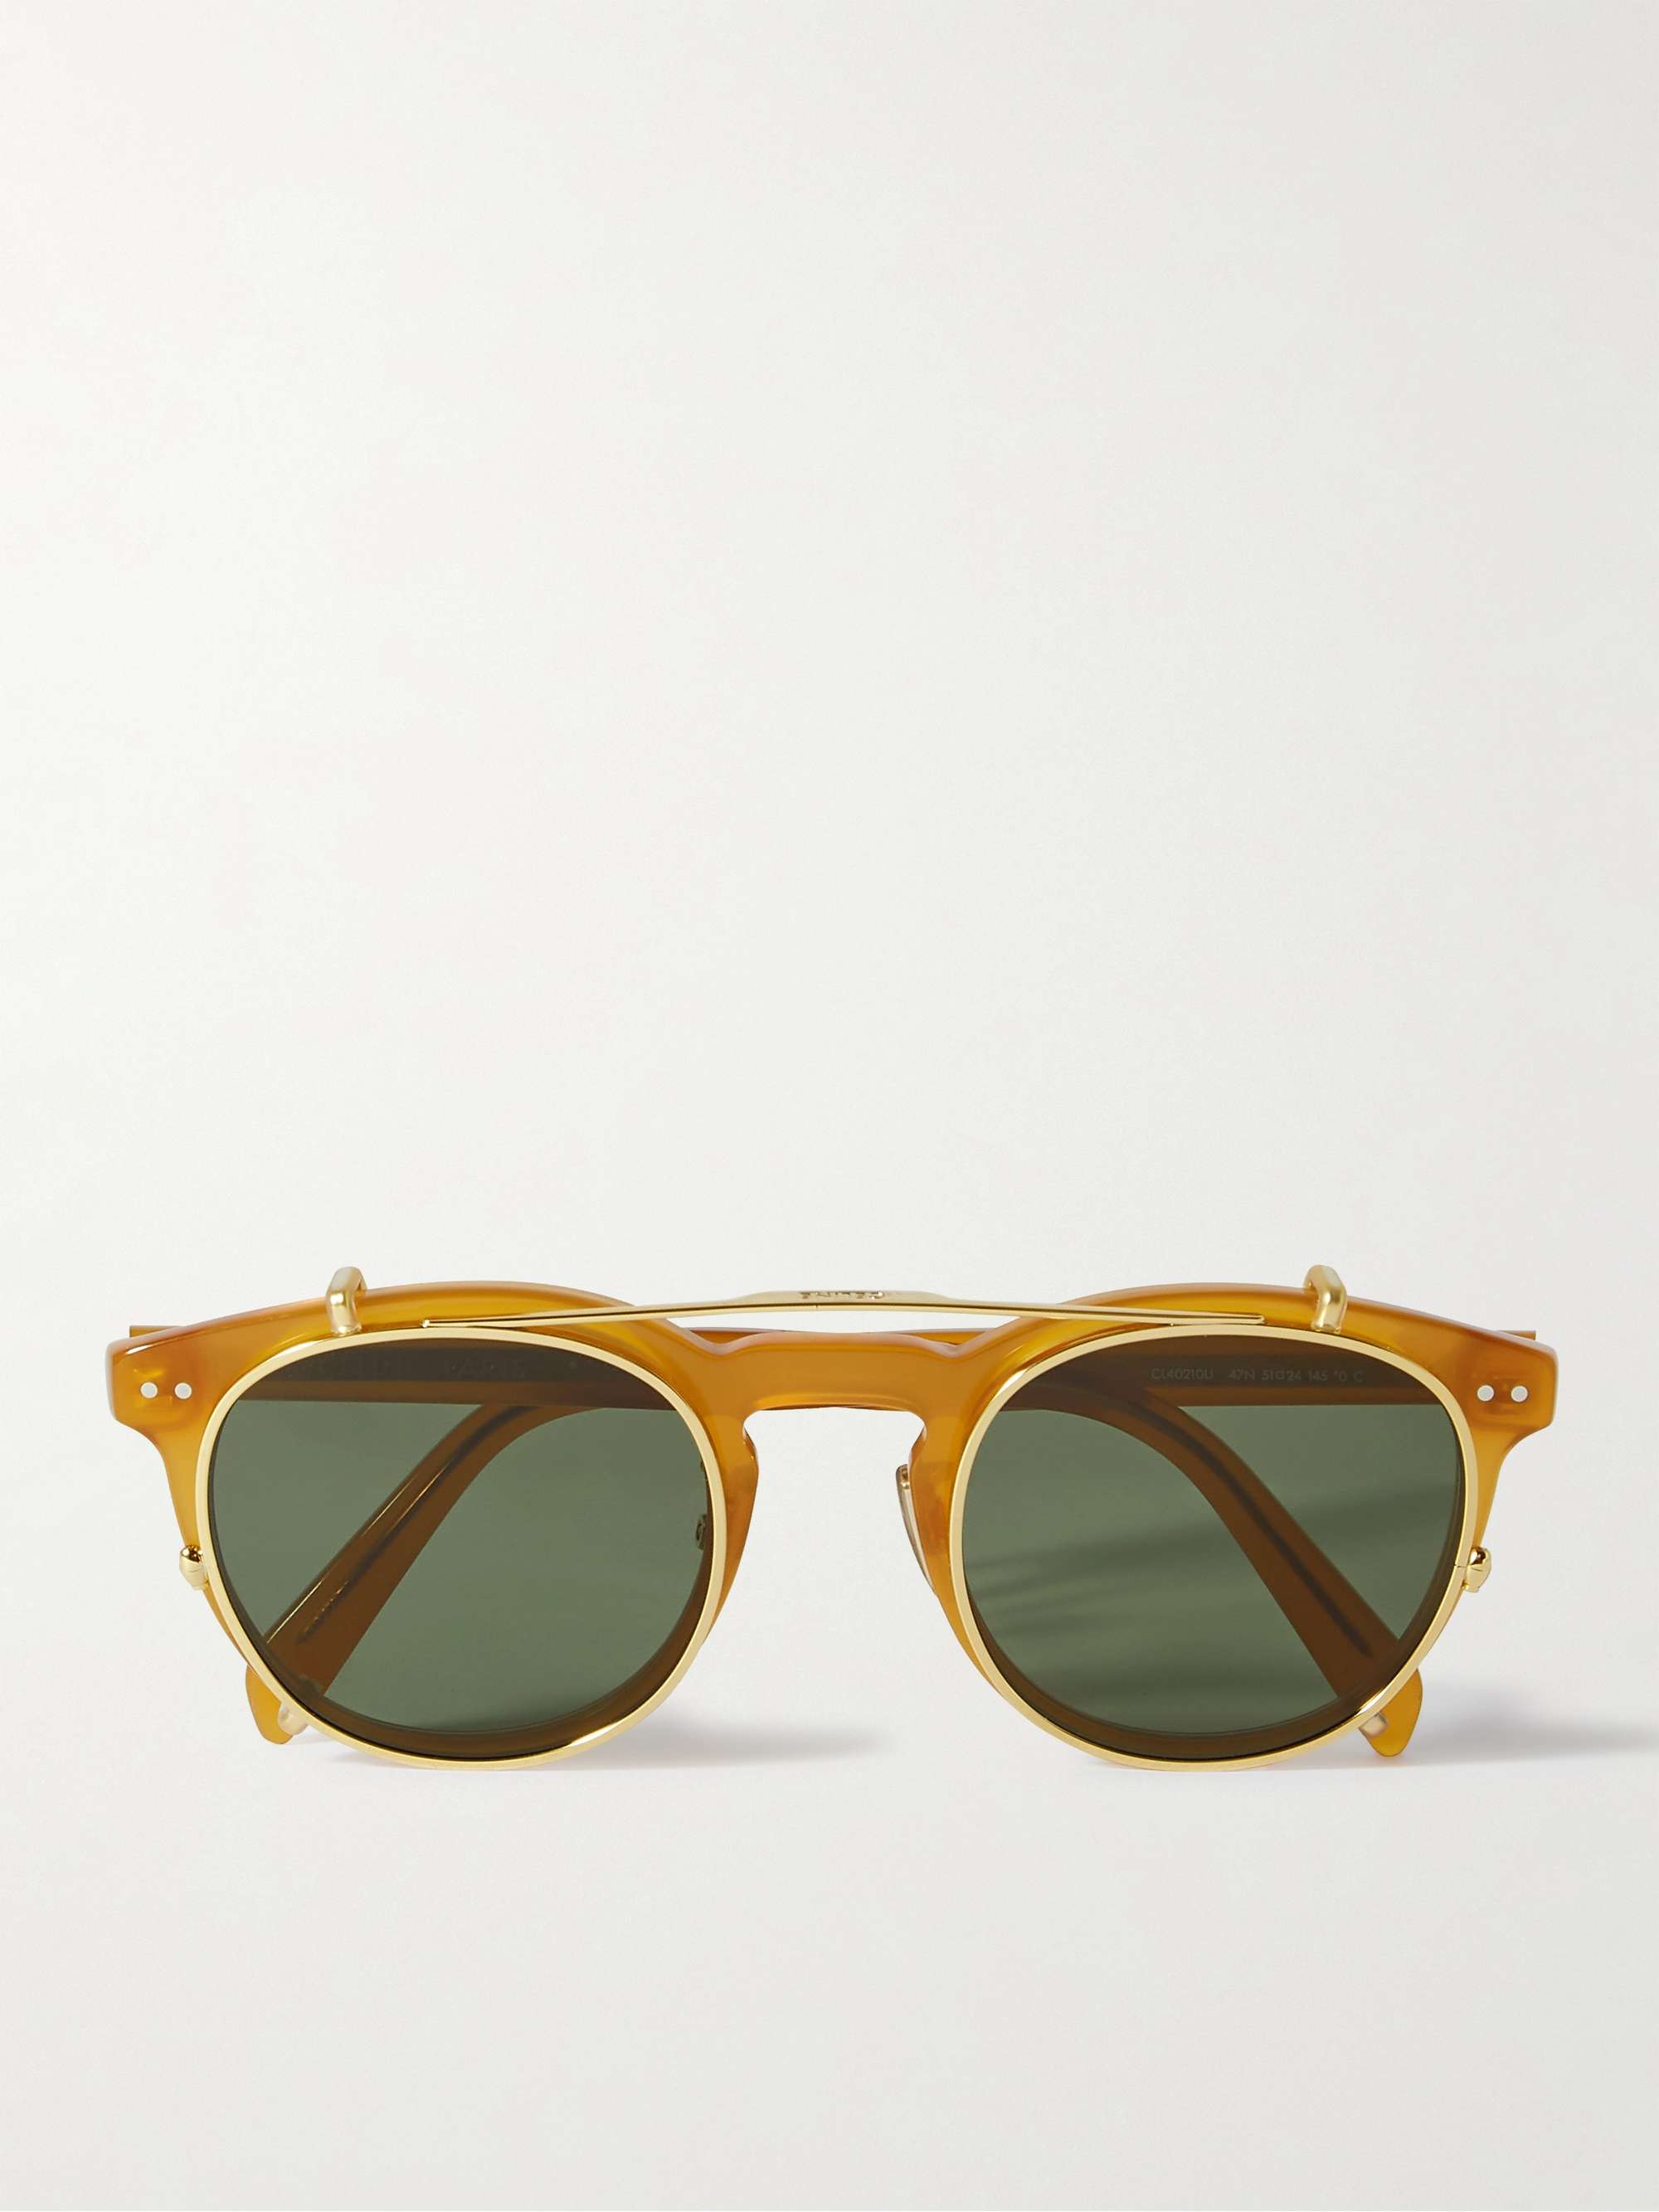 CELINE HOMME Convertible Round-Frame Acetate and Gold-Tone Optical Glasses